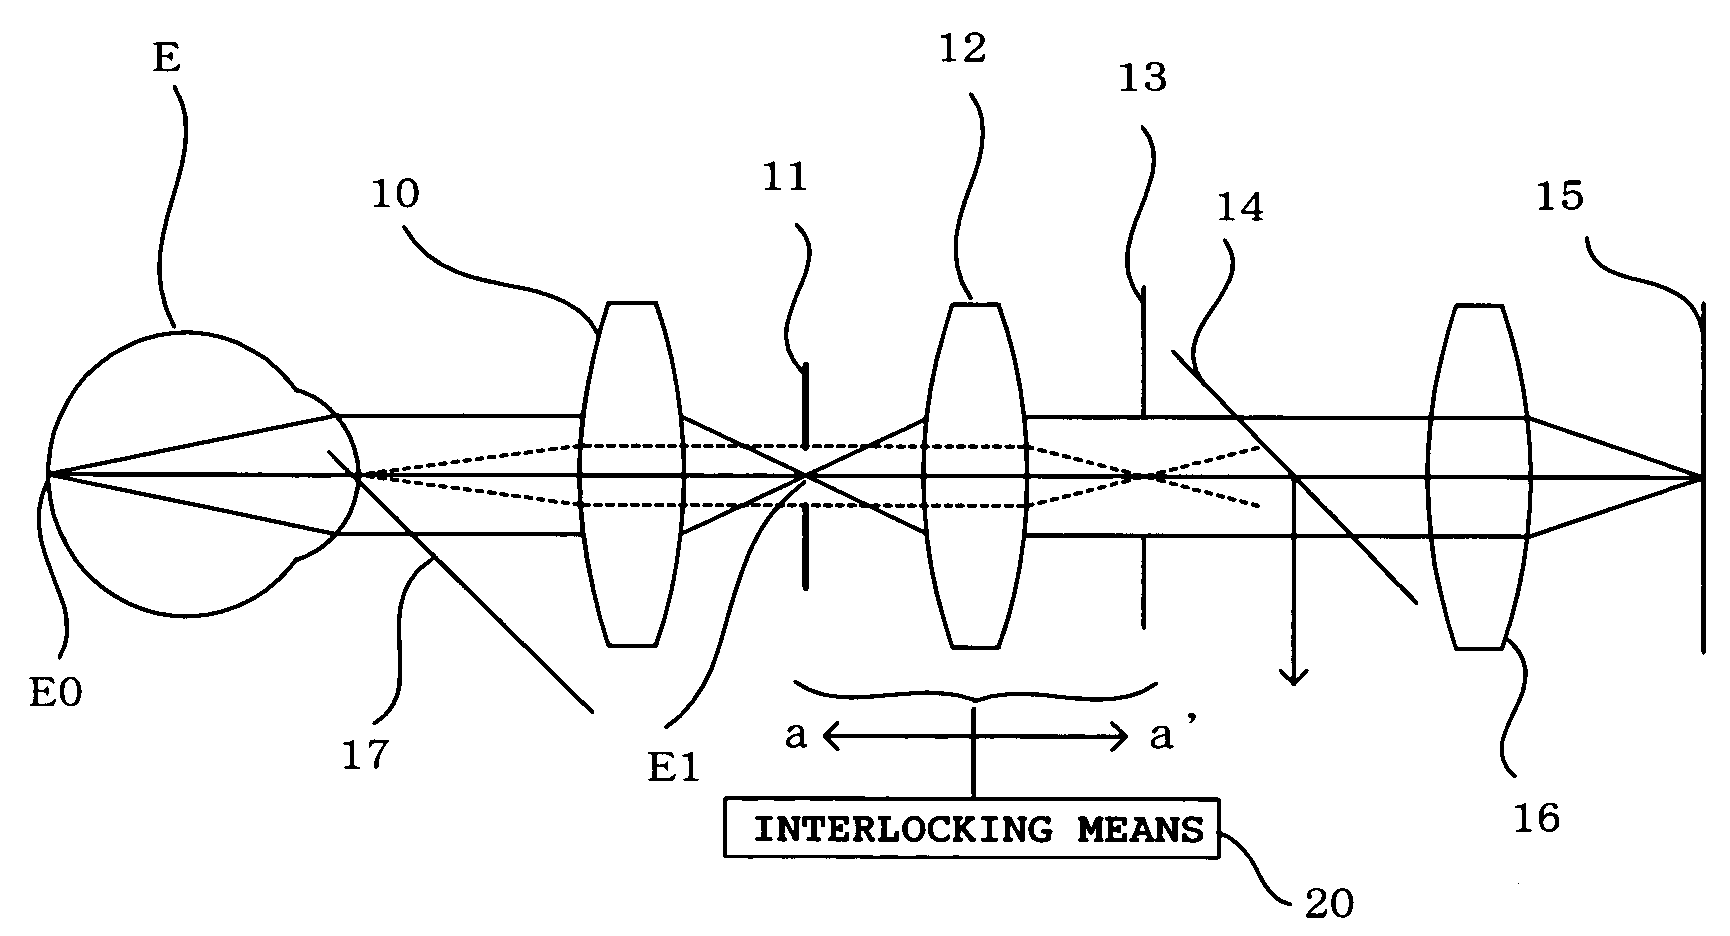 Ophthalmic photographic apparatus